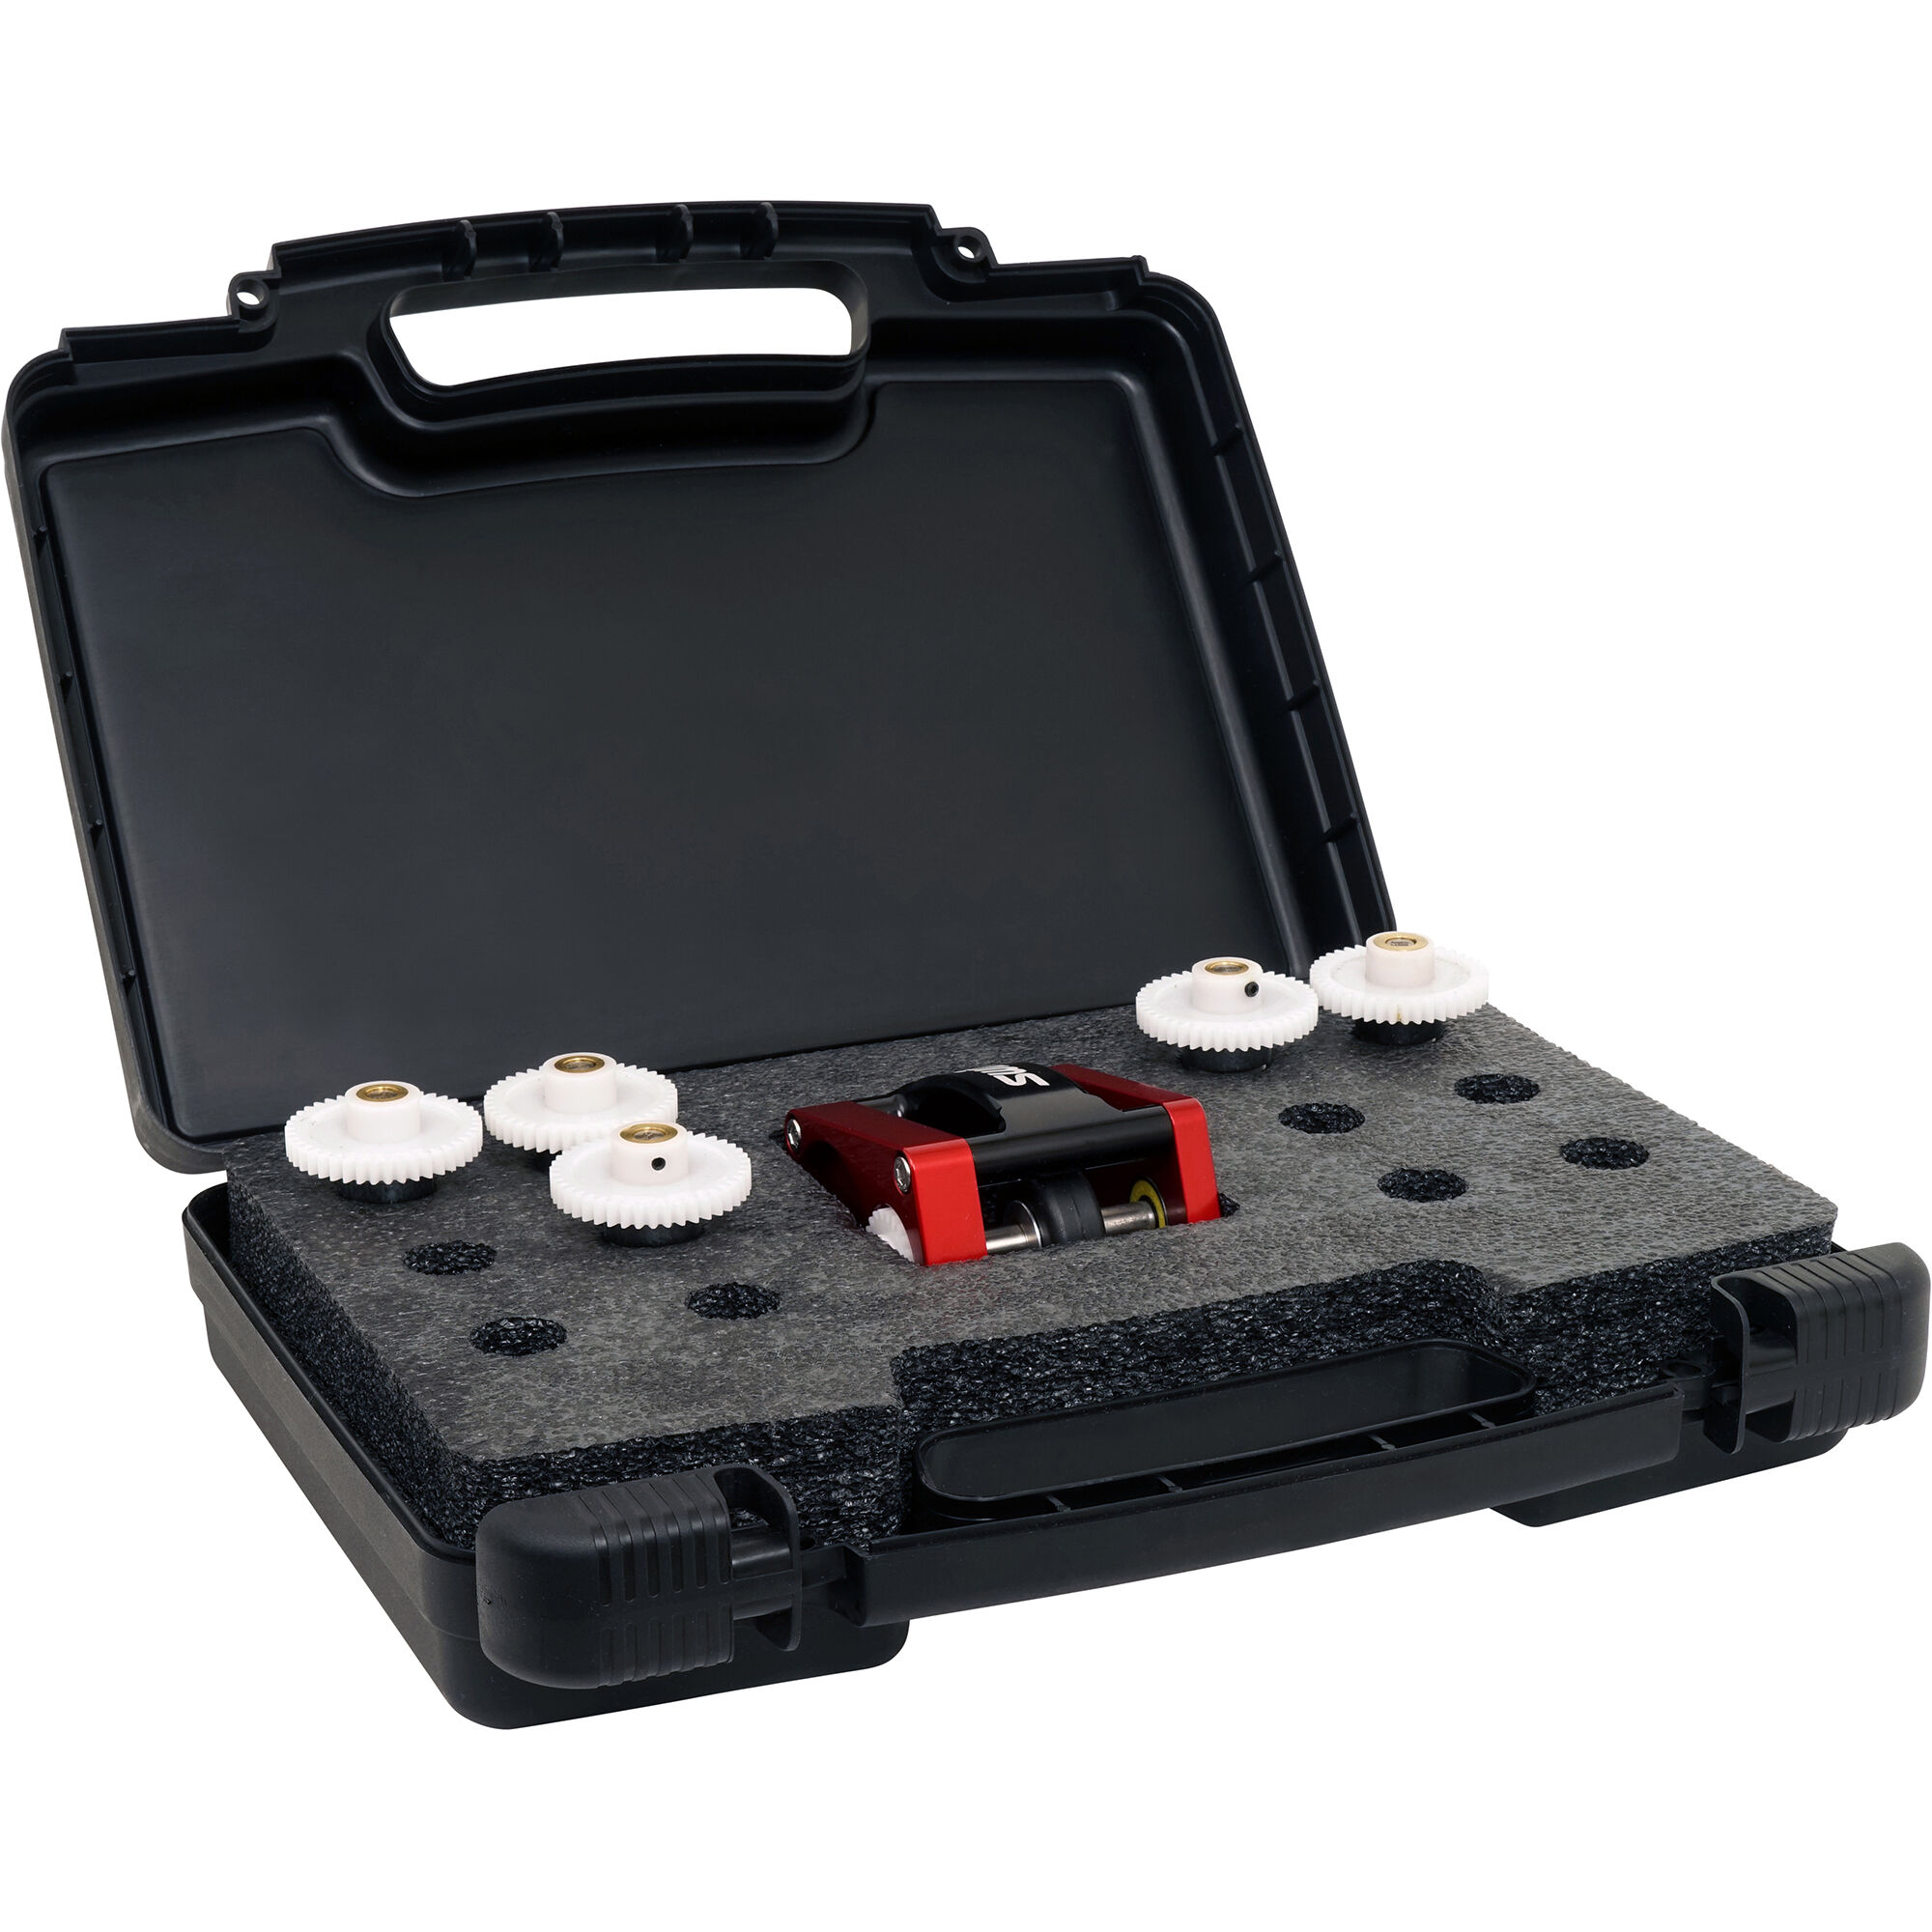 T047G Structure tool w/5 rollers (case not included)